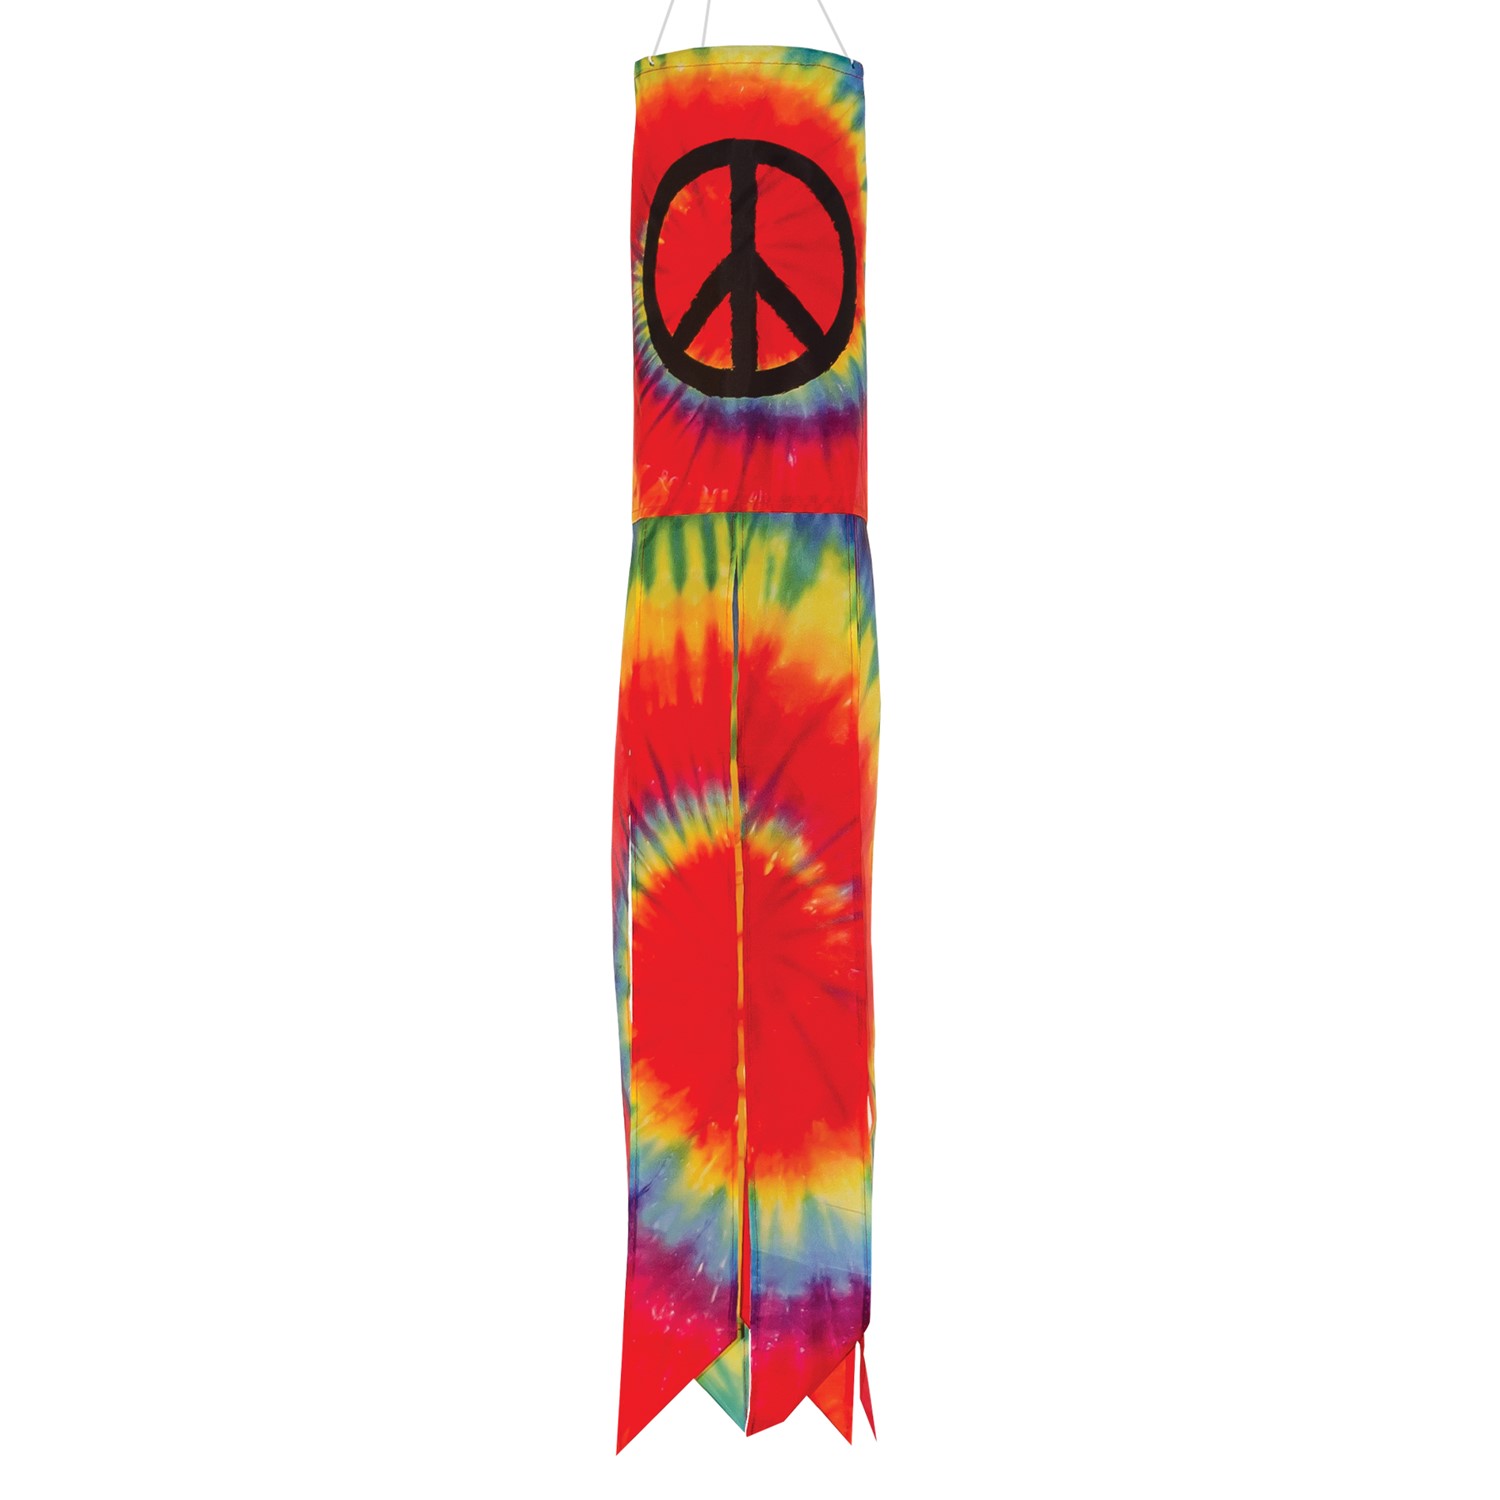 In the Breeze Peace Sign 30" Windsock 5015